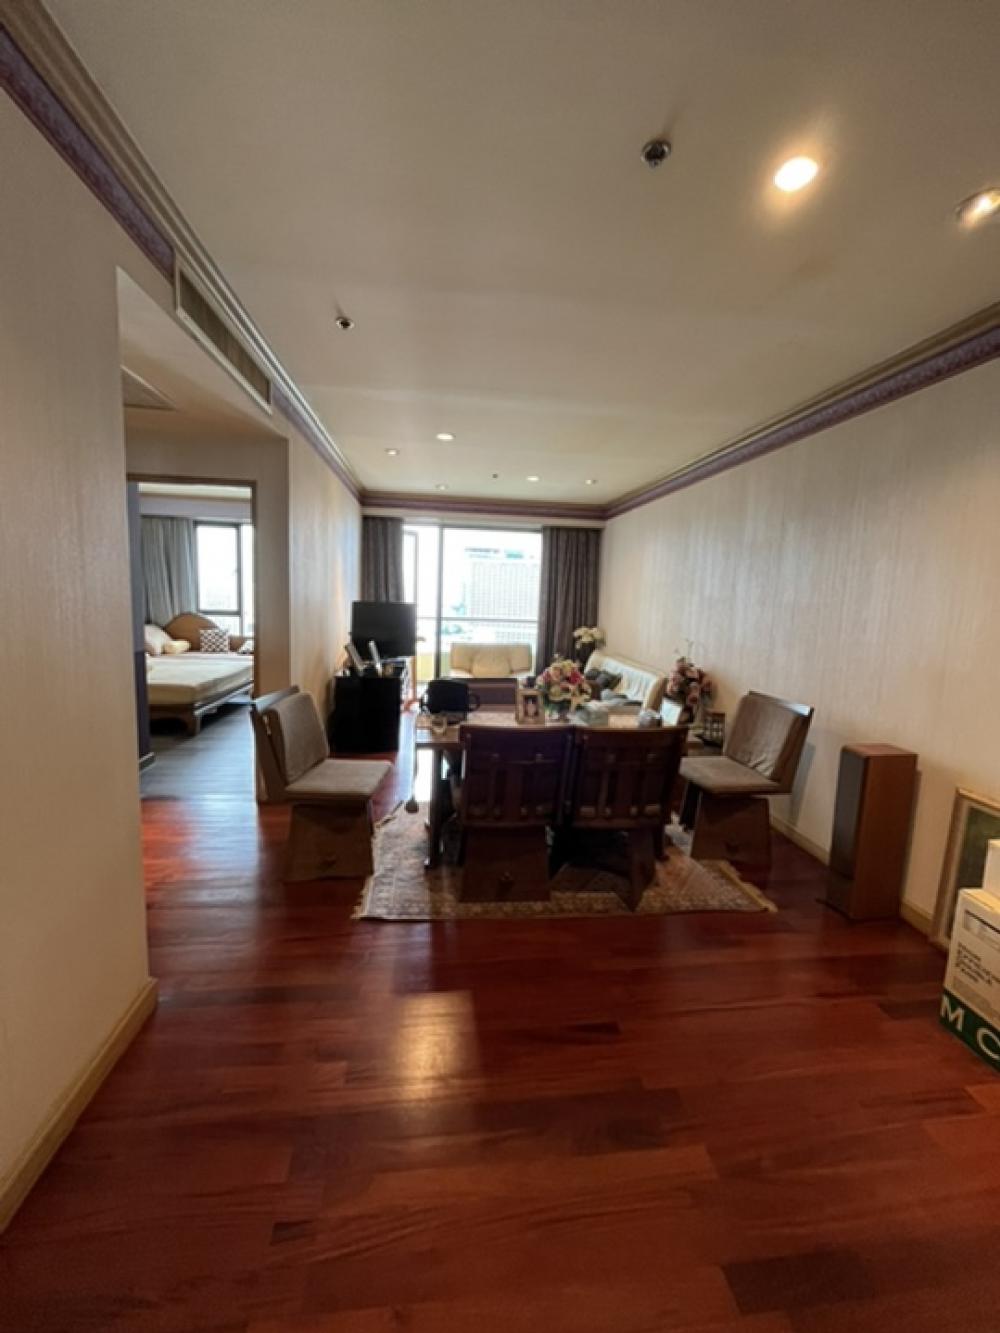 For SaleCondoWongwianyai, Charoennakor : Condo for sale, Baan Chao Phraya, 25th floor, room size 68 square meters, 1 bedroom, 1 living room, 1 kitchen and 1 bathroom, Icon Siam view.